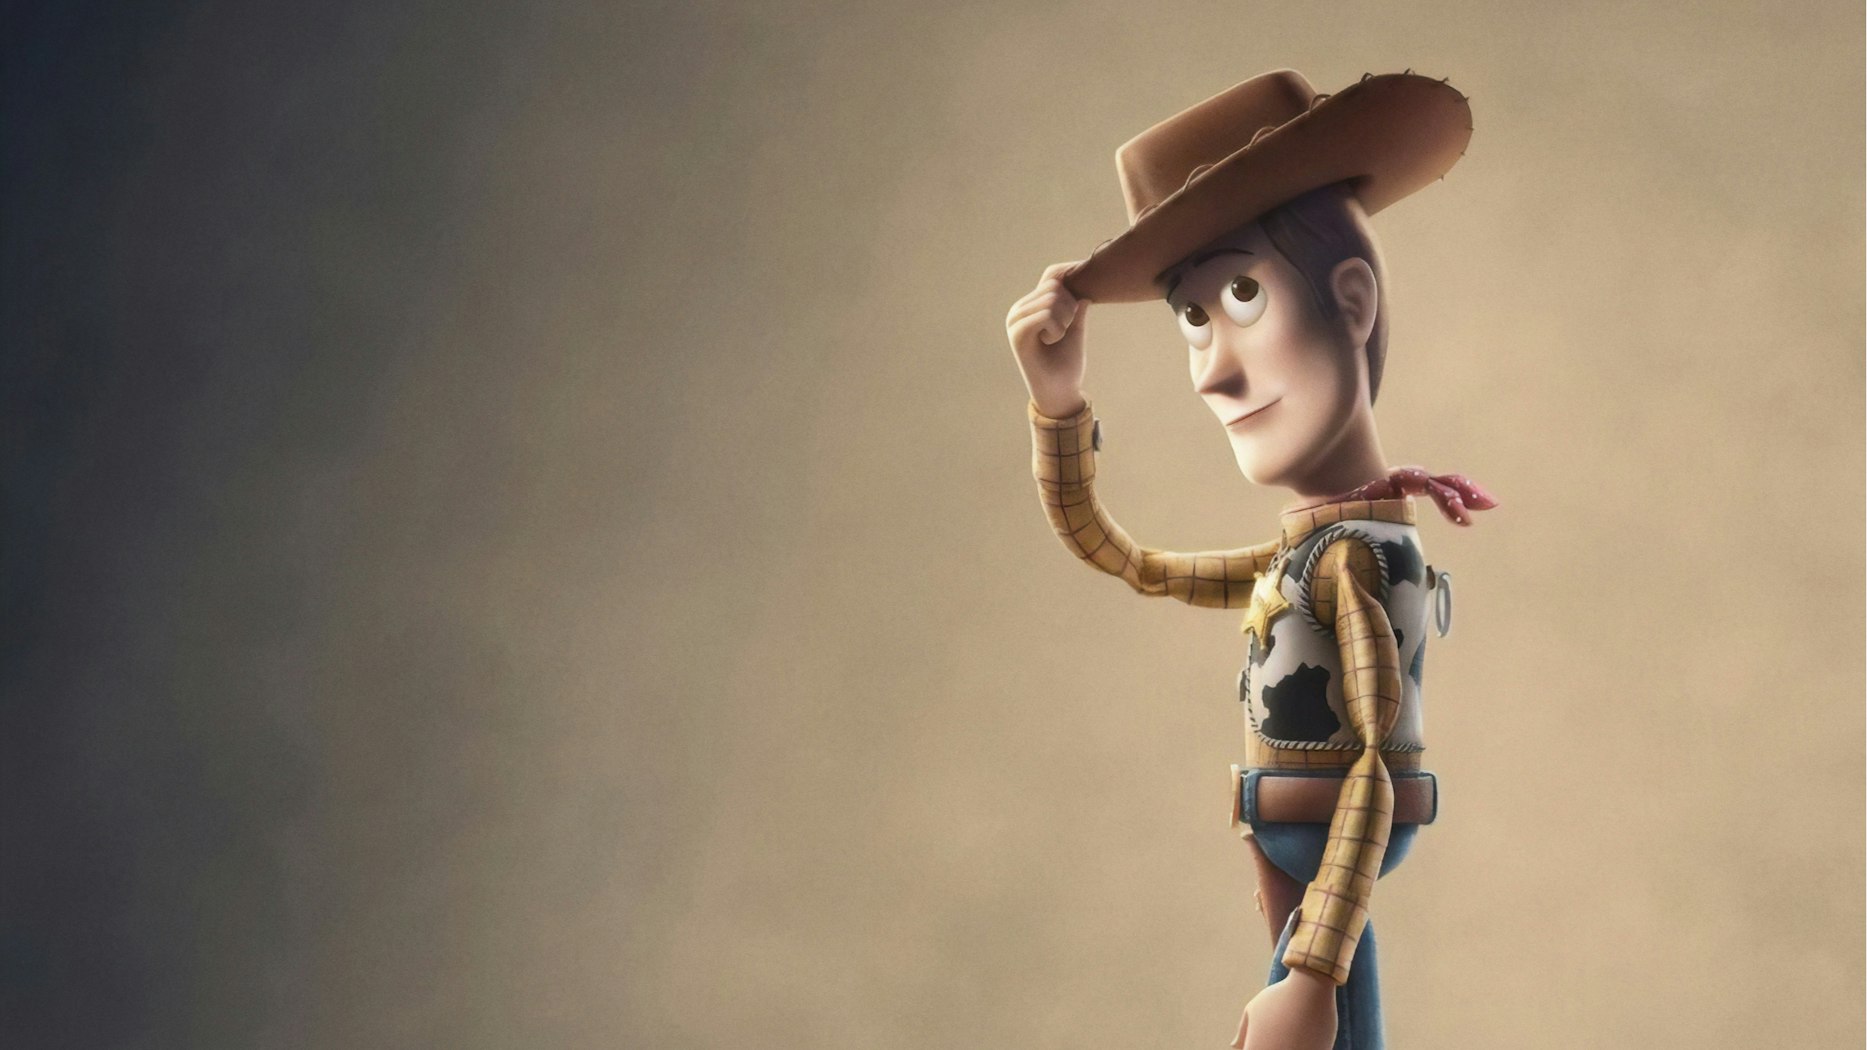 You Ve Still Got A Friend In Me The Charming Gravity Of Toy Story 4 Desiring God